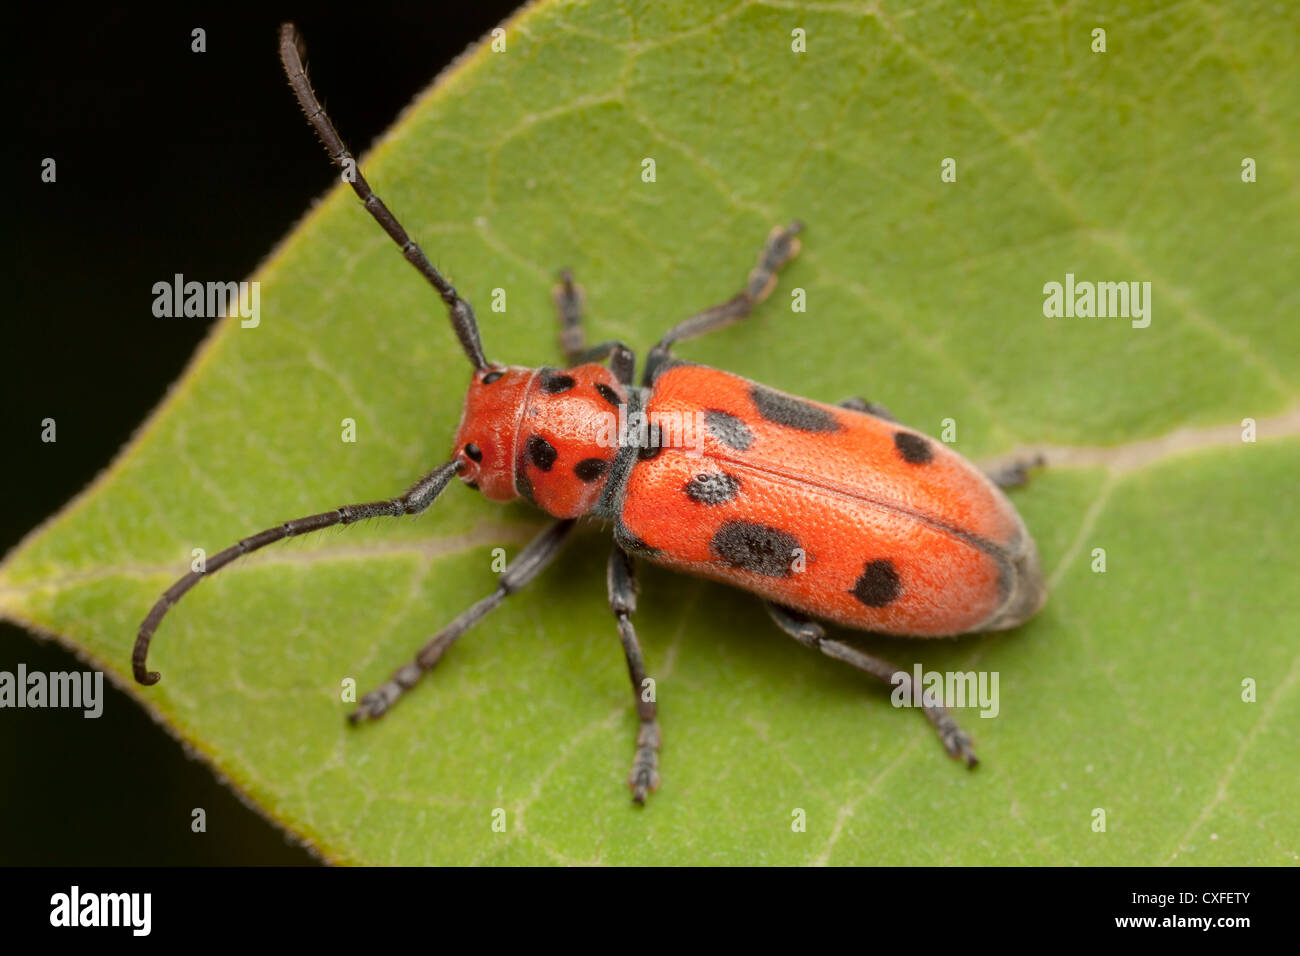 A Red Milkweed Beetle (Tetraopes tetrophthalmus) perches on a Common Milkweed plant leaf. Stock Photo